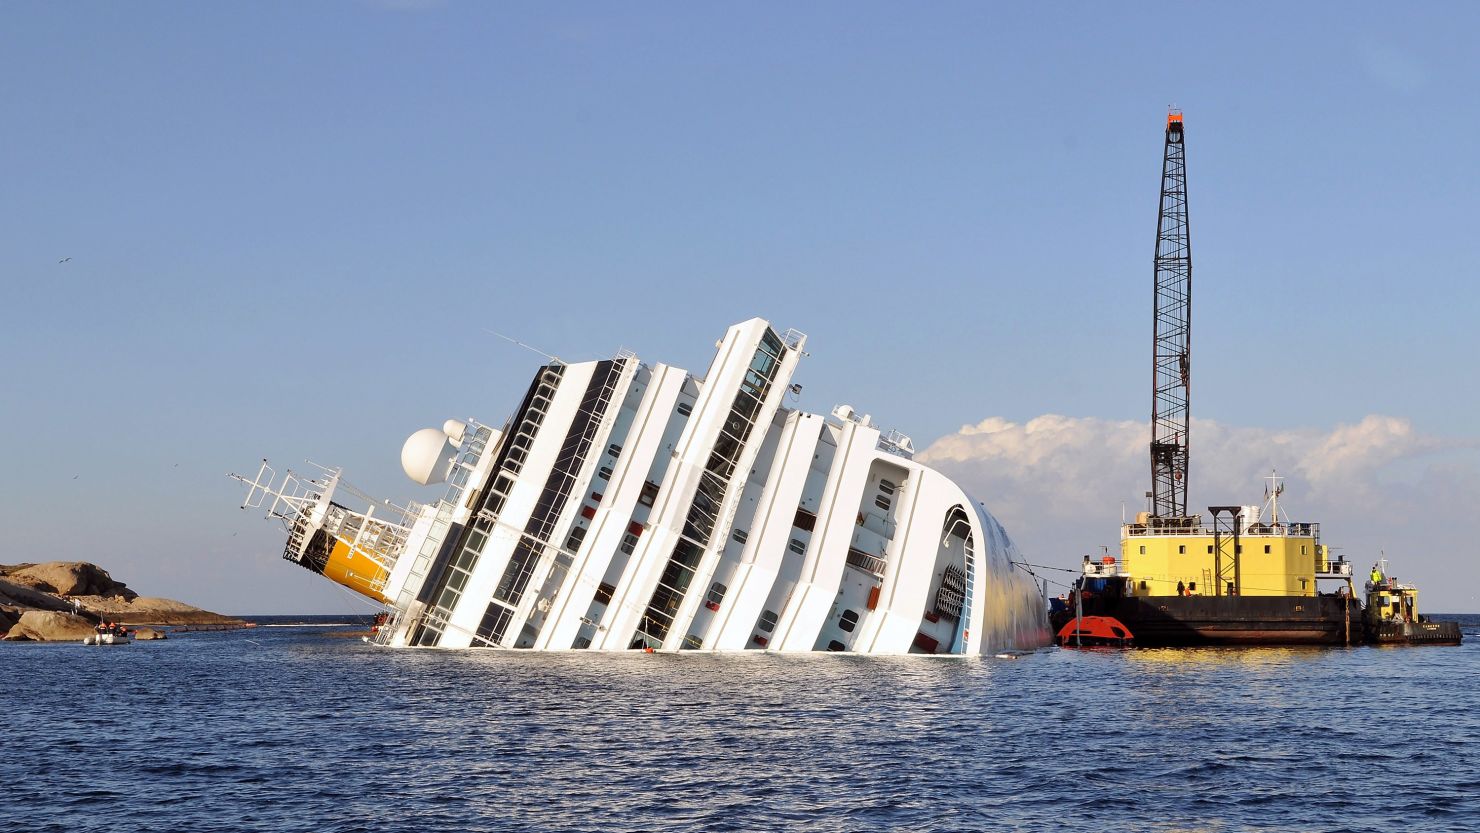 The Costa Concordia struck rocks off Italy on January 13 with about 3,200 passengers and 1,000 crew members on board.